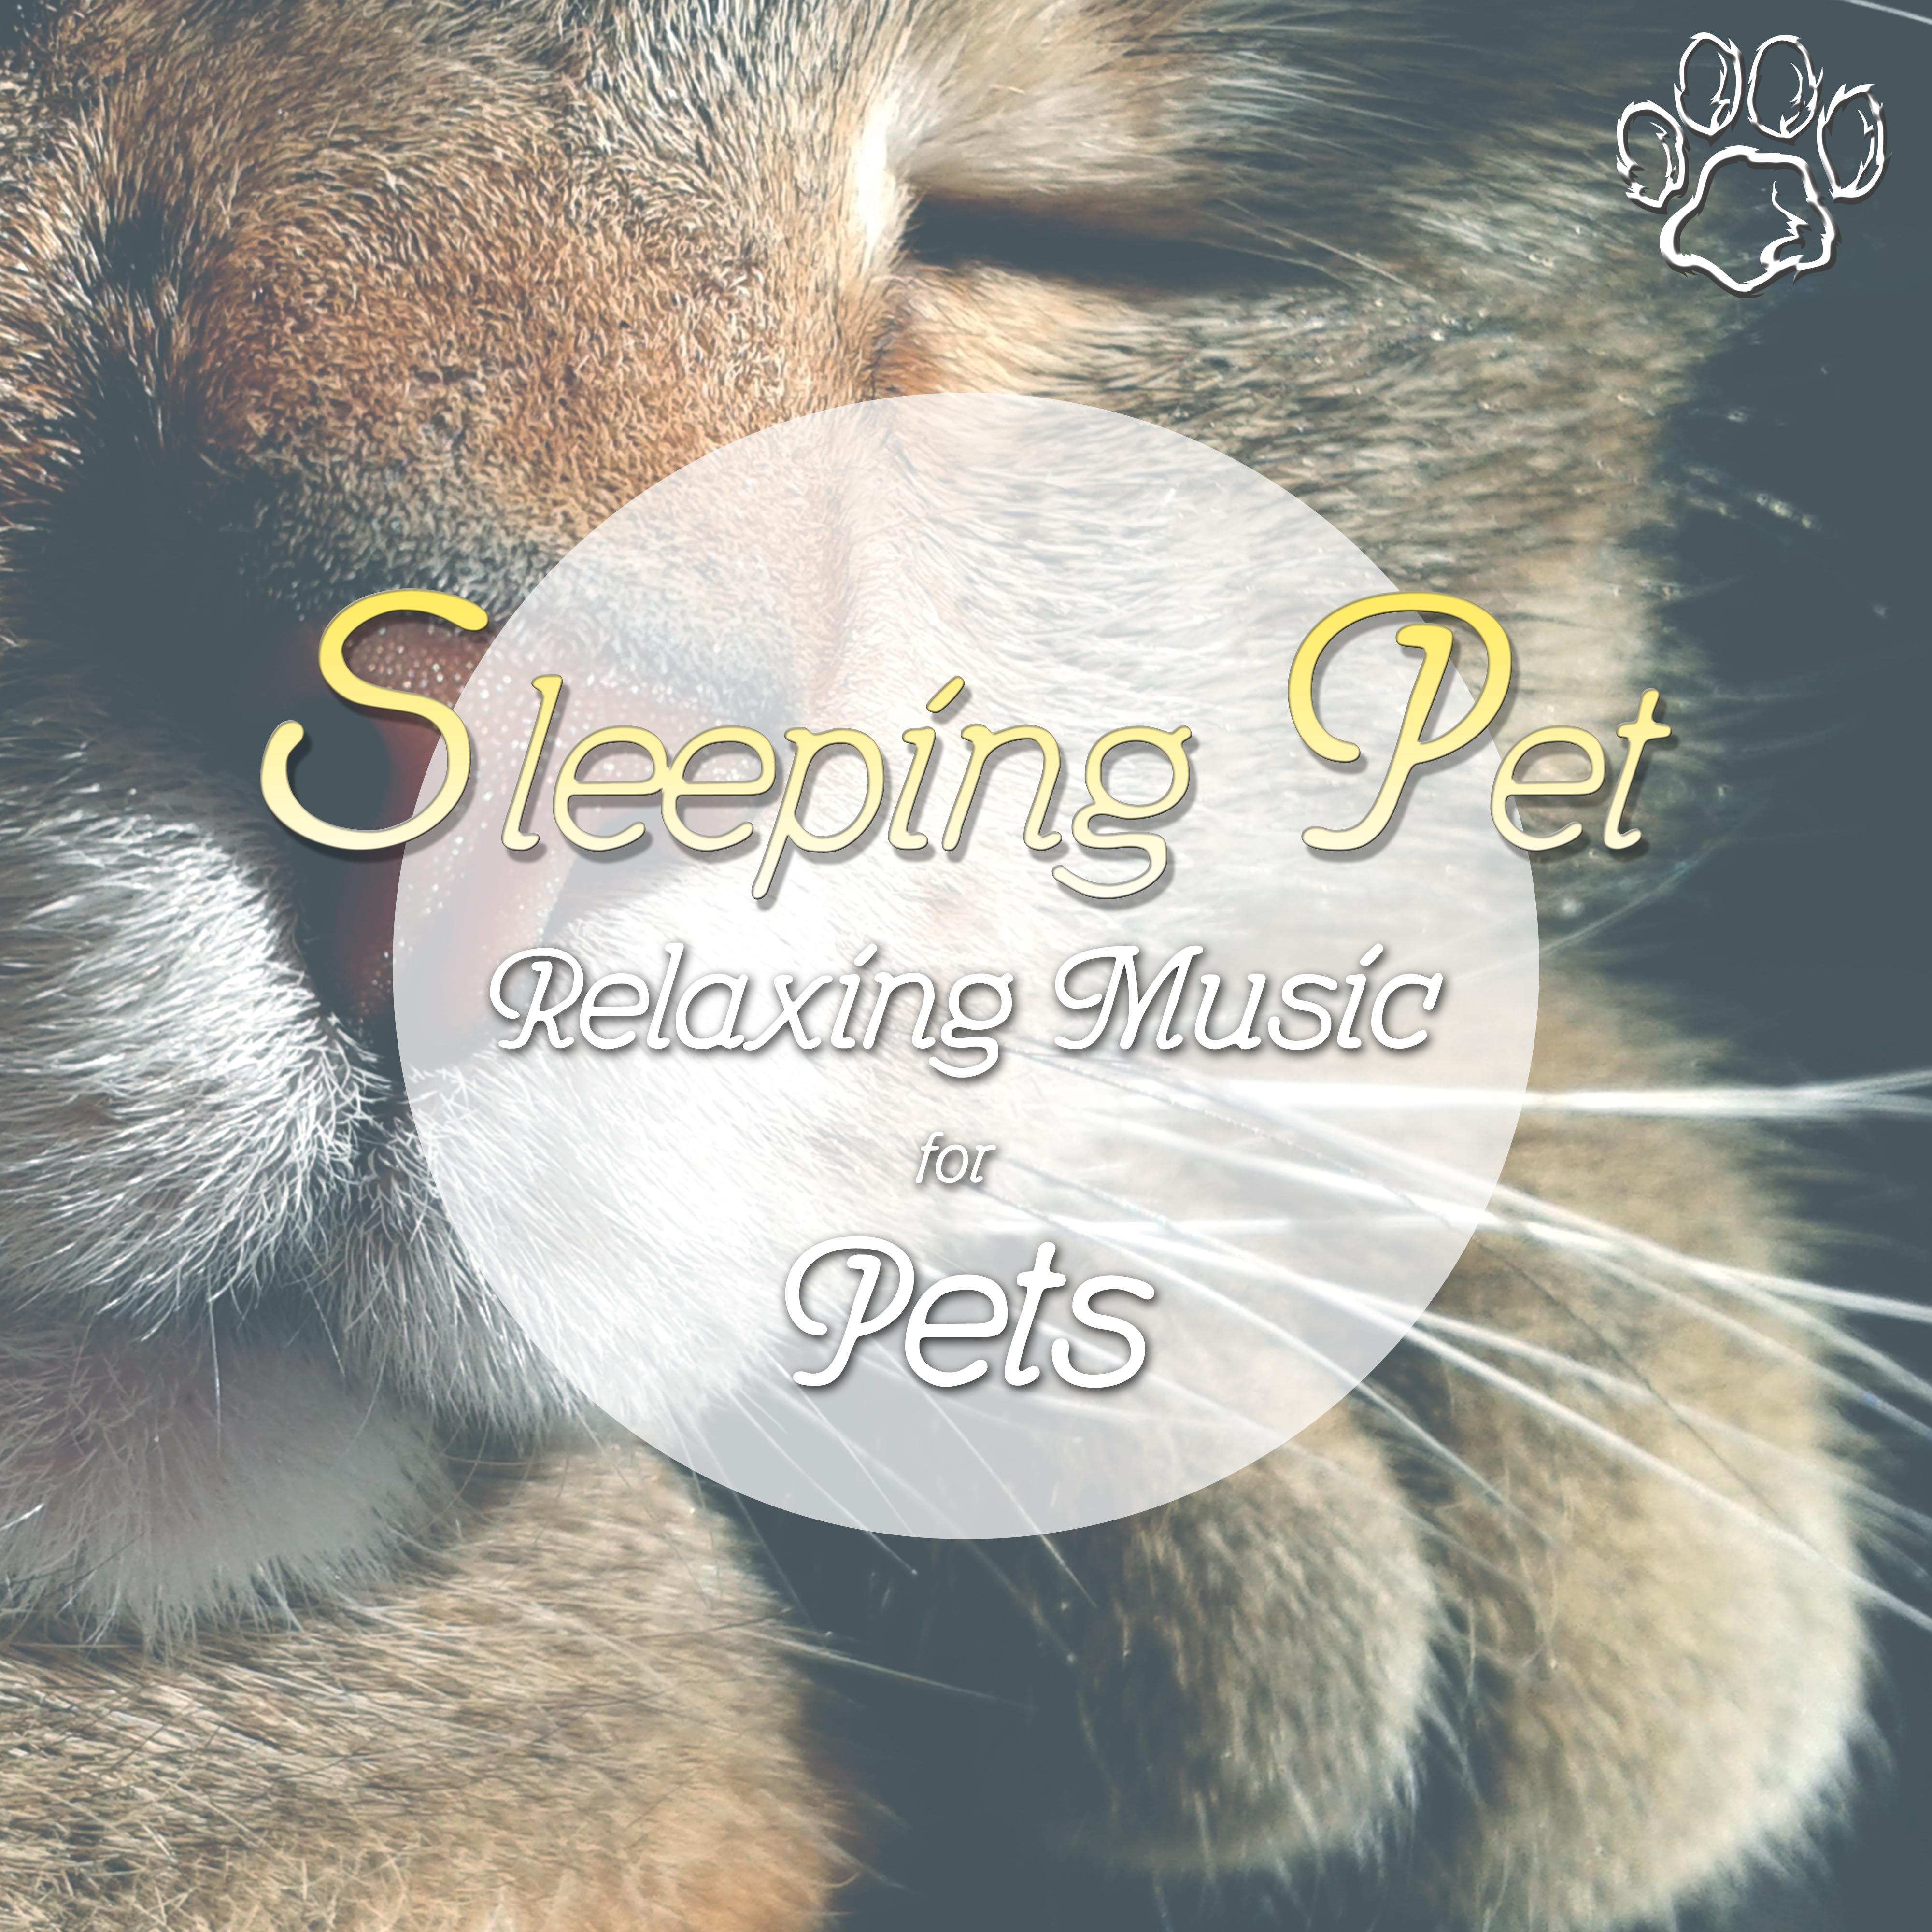 Sleeping Pet - Incredibly Relaxing Music for your Best Friend with Calming Songs and Nature Sounds